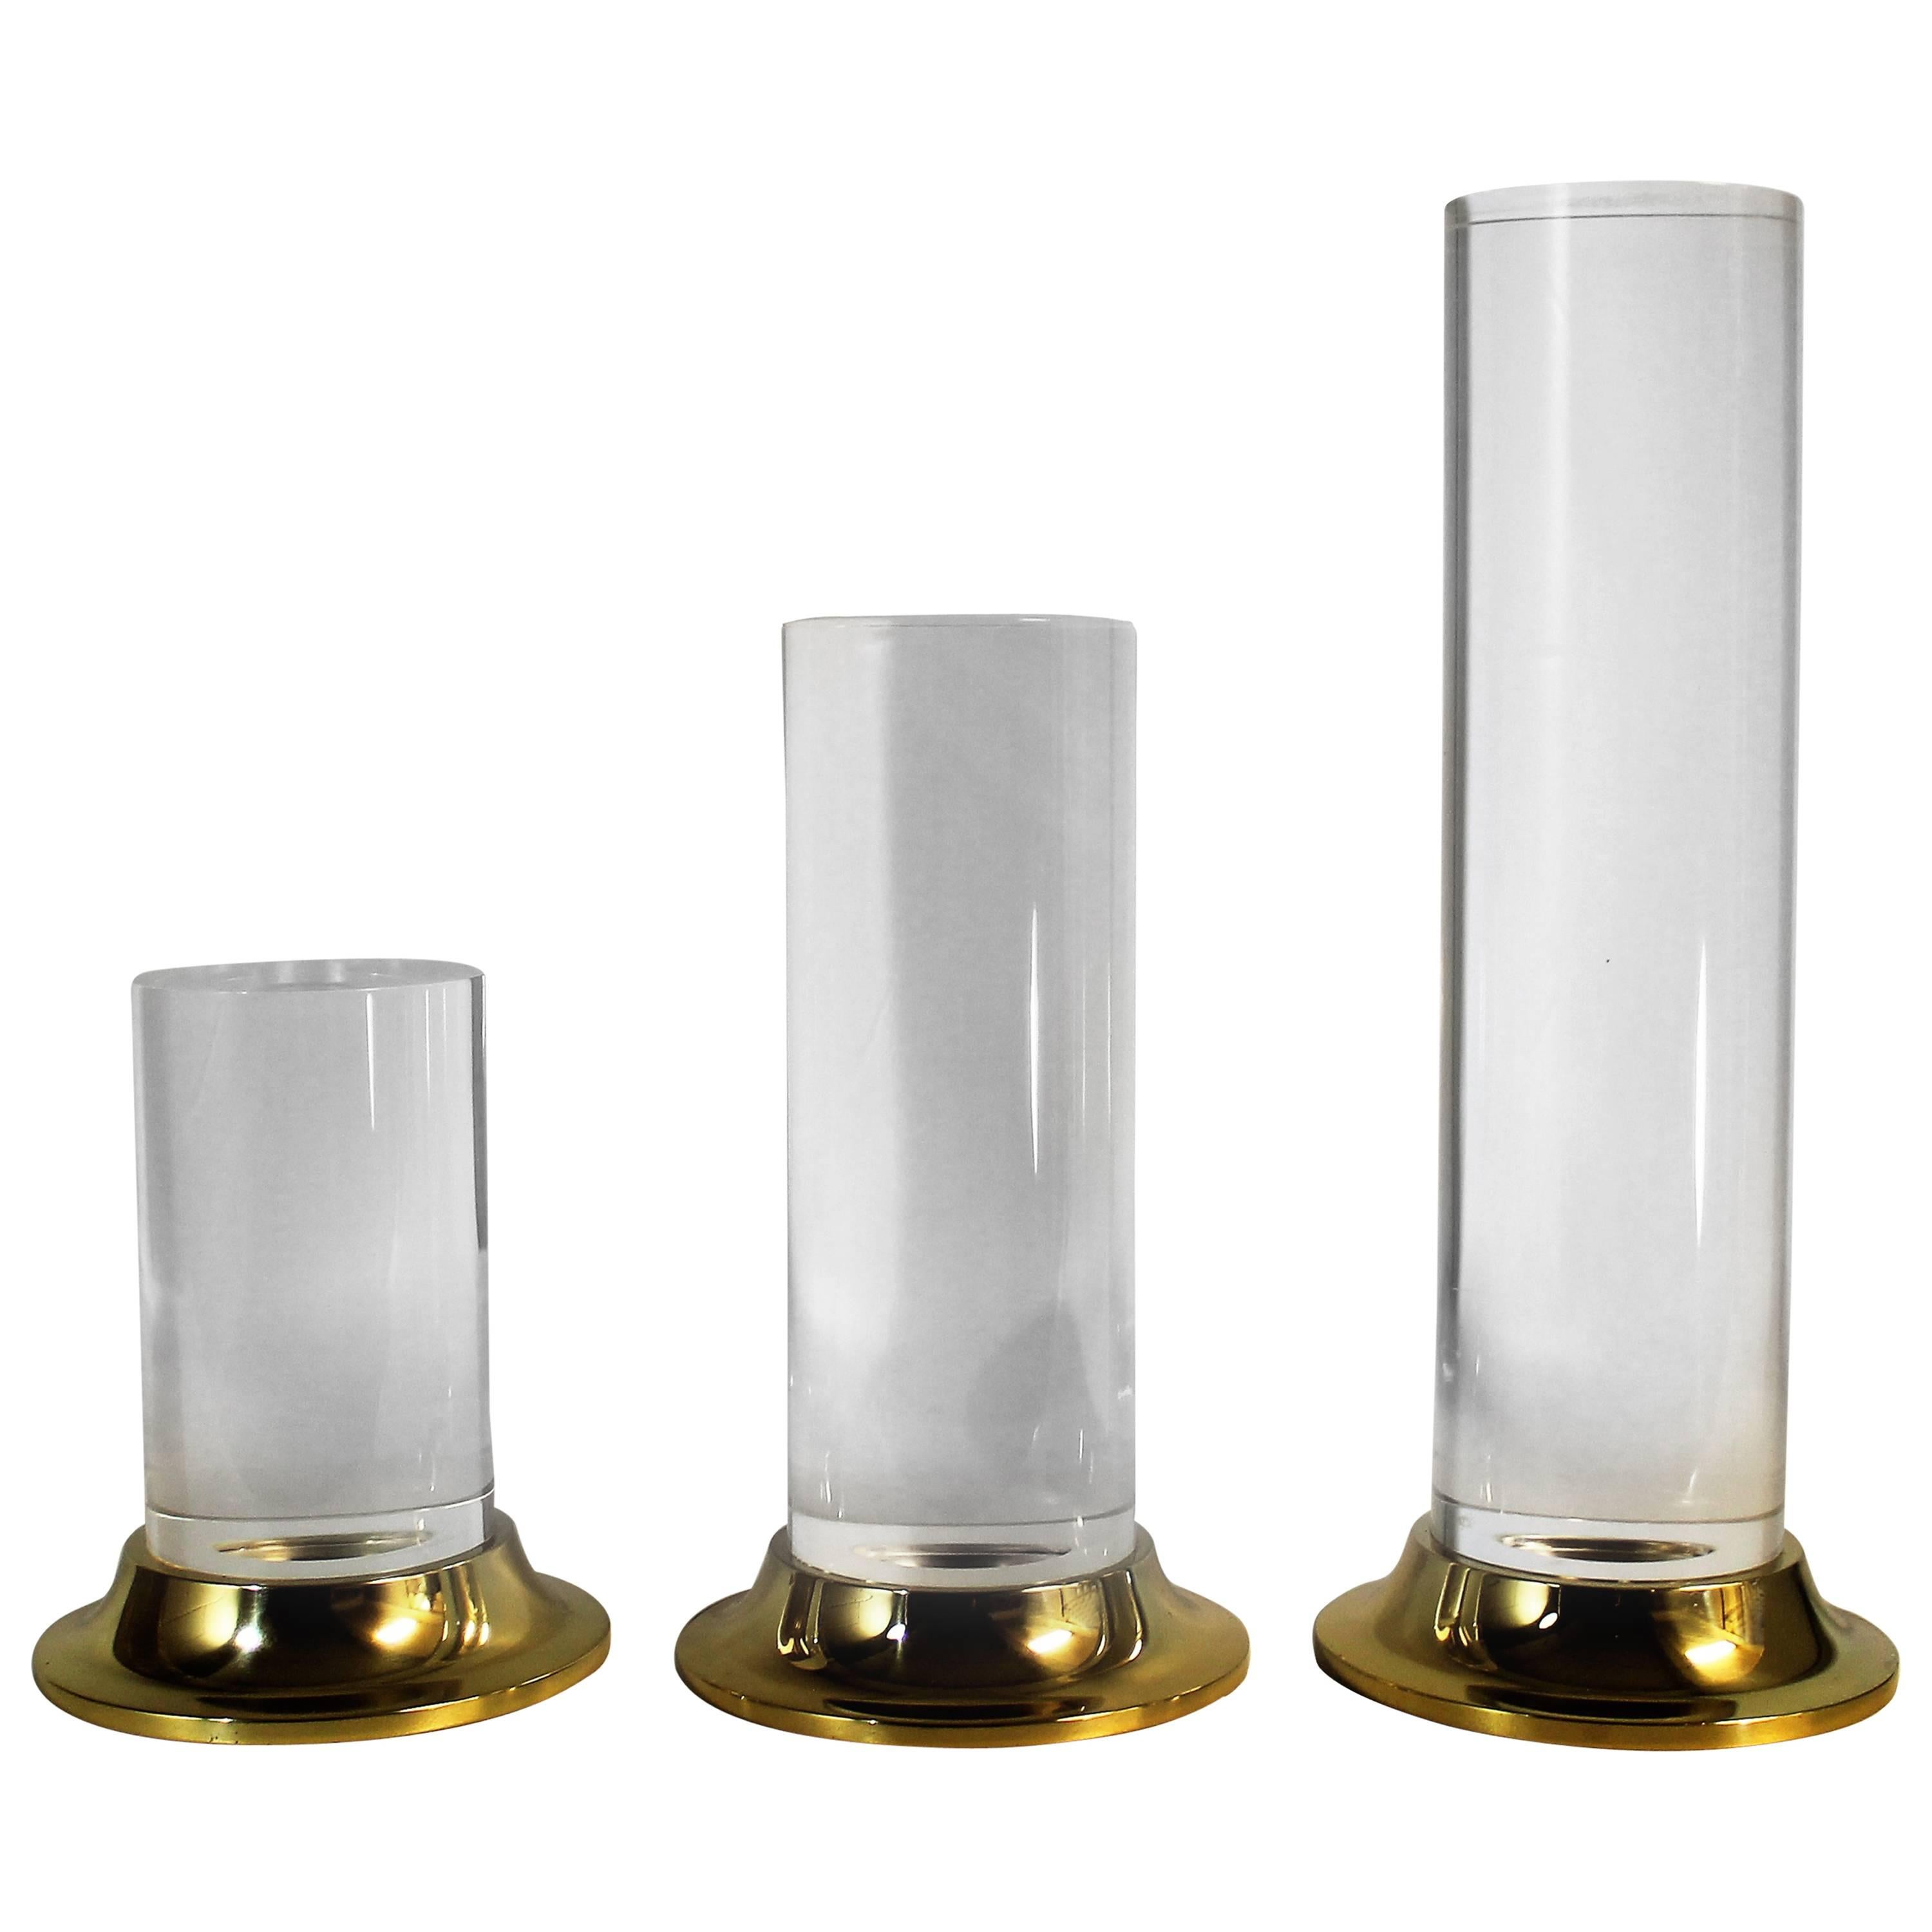 Set of Three Lucite and Brass Candlesticks or Candle Holders, Mid-Century Modern